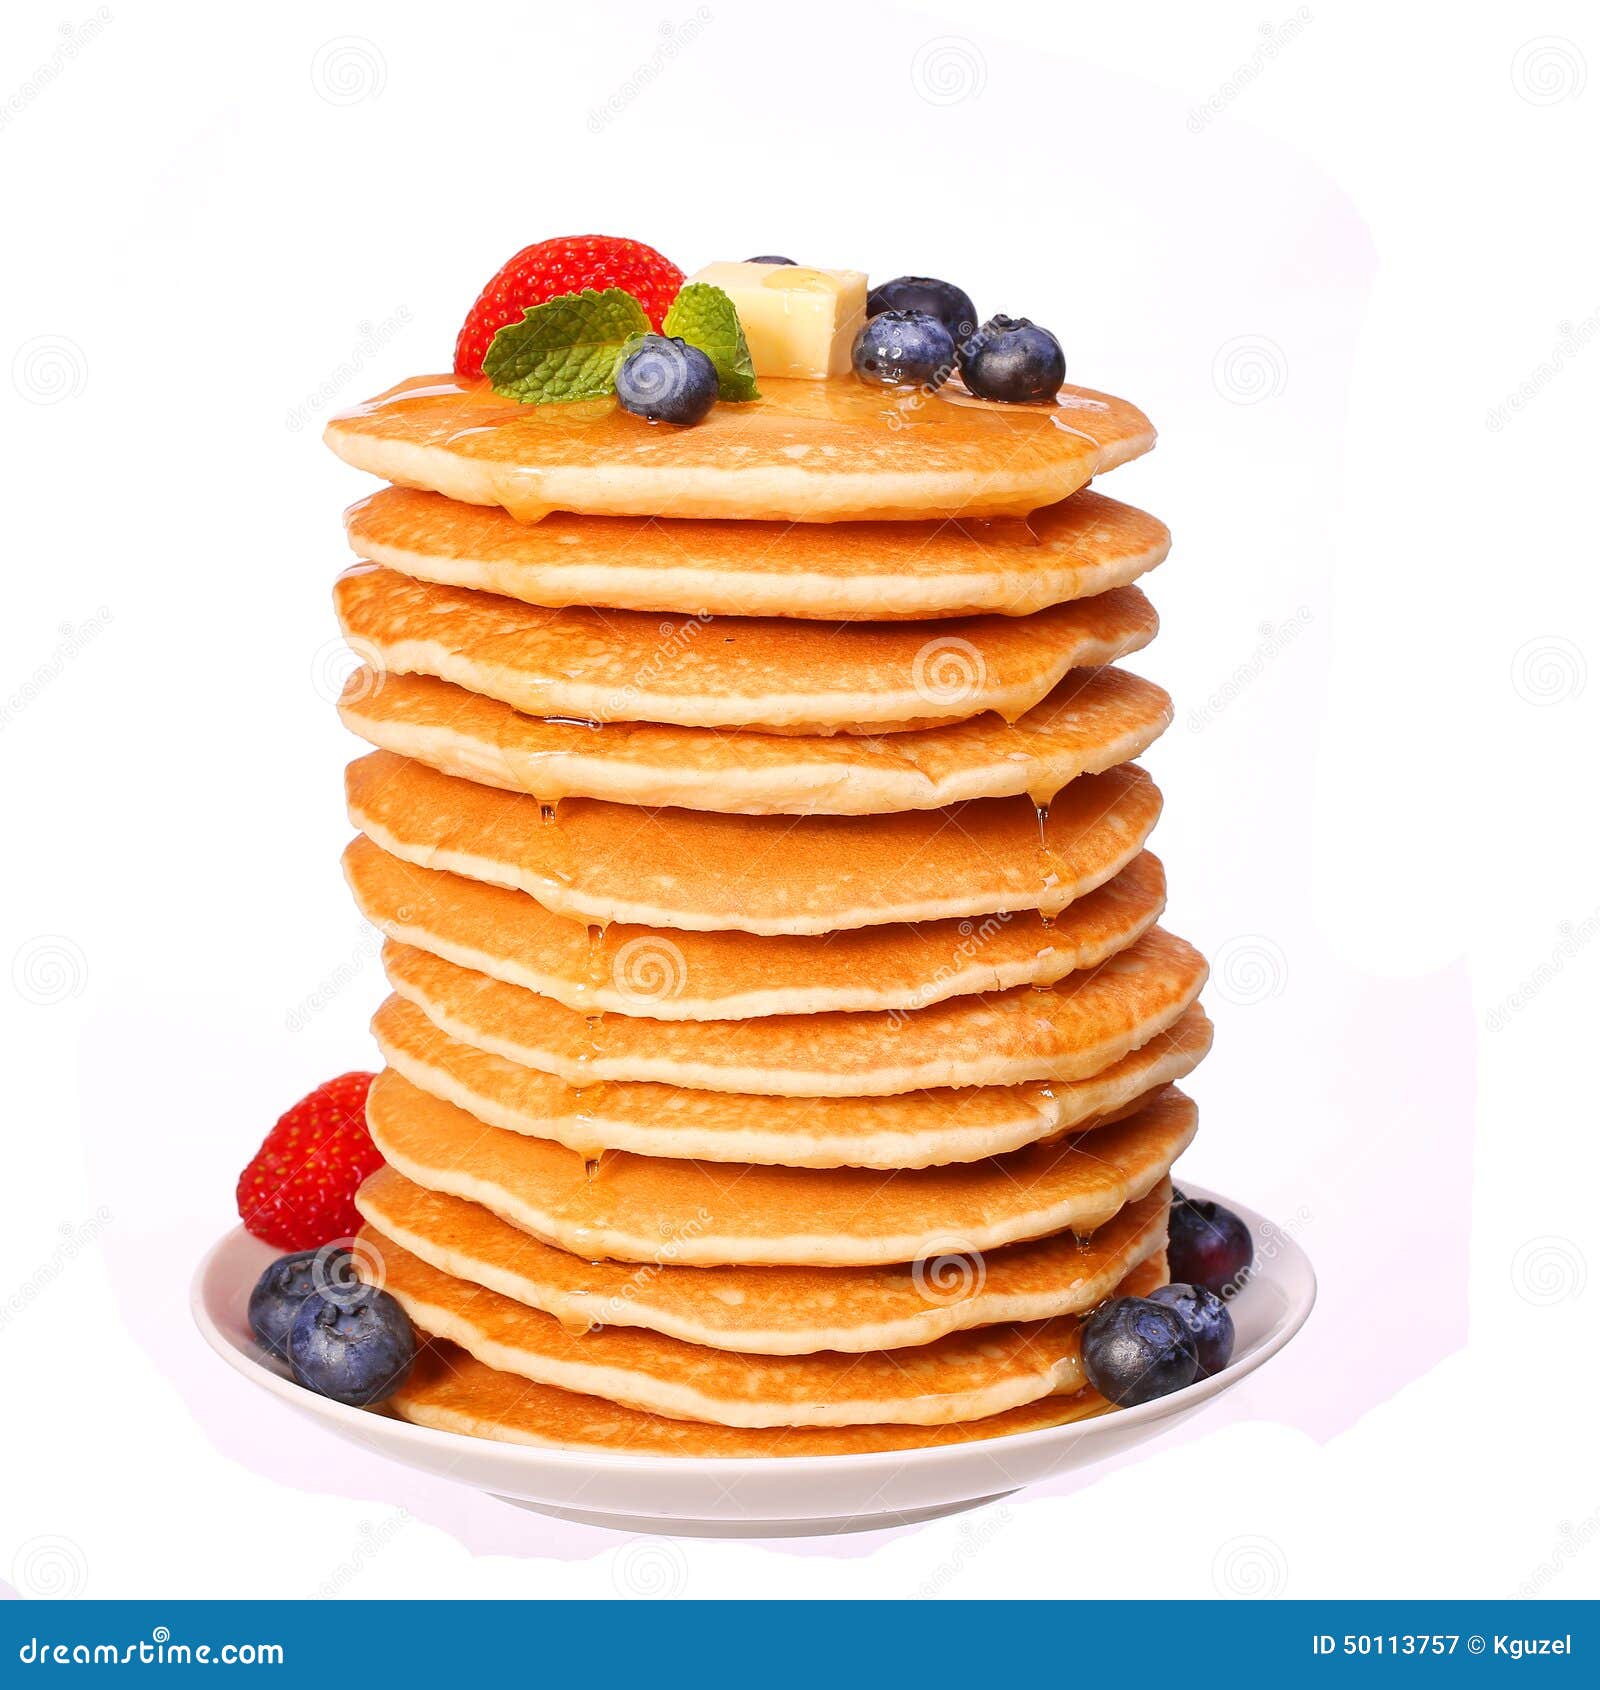 stack of pancakes strawberry and blueberry 